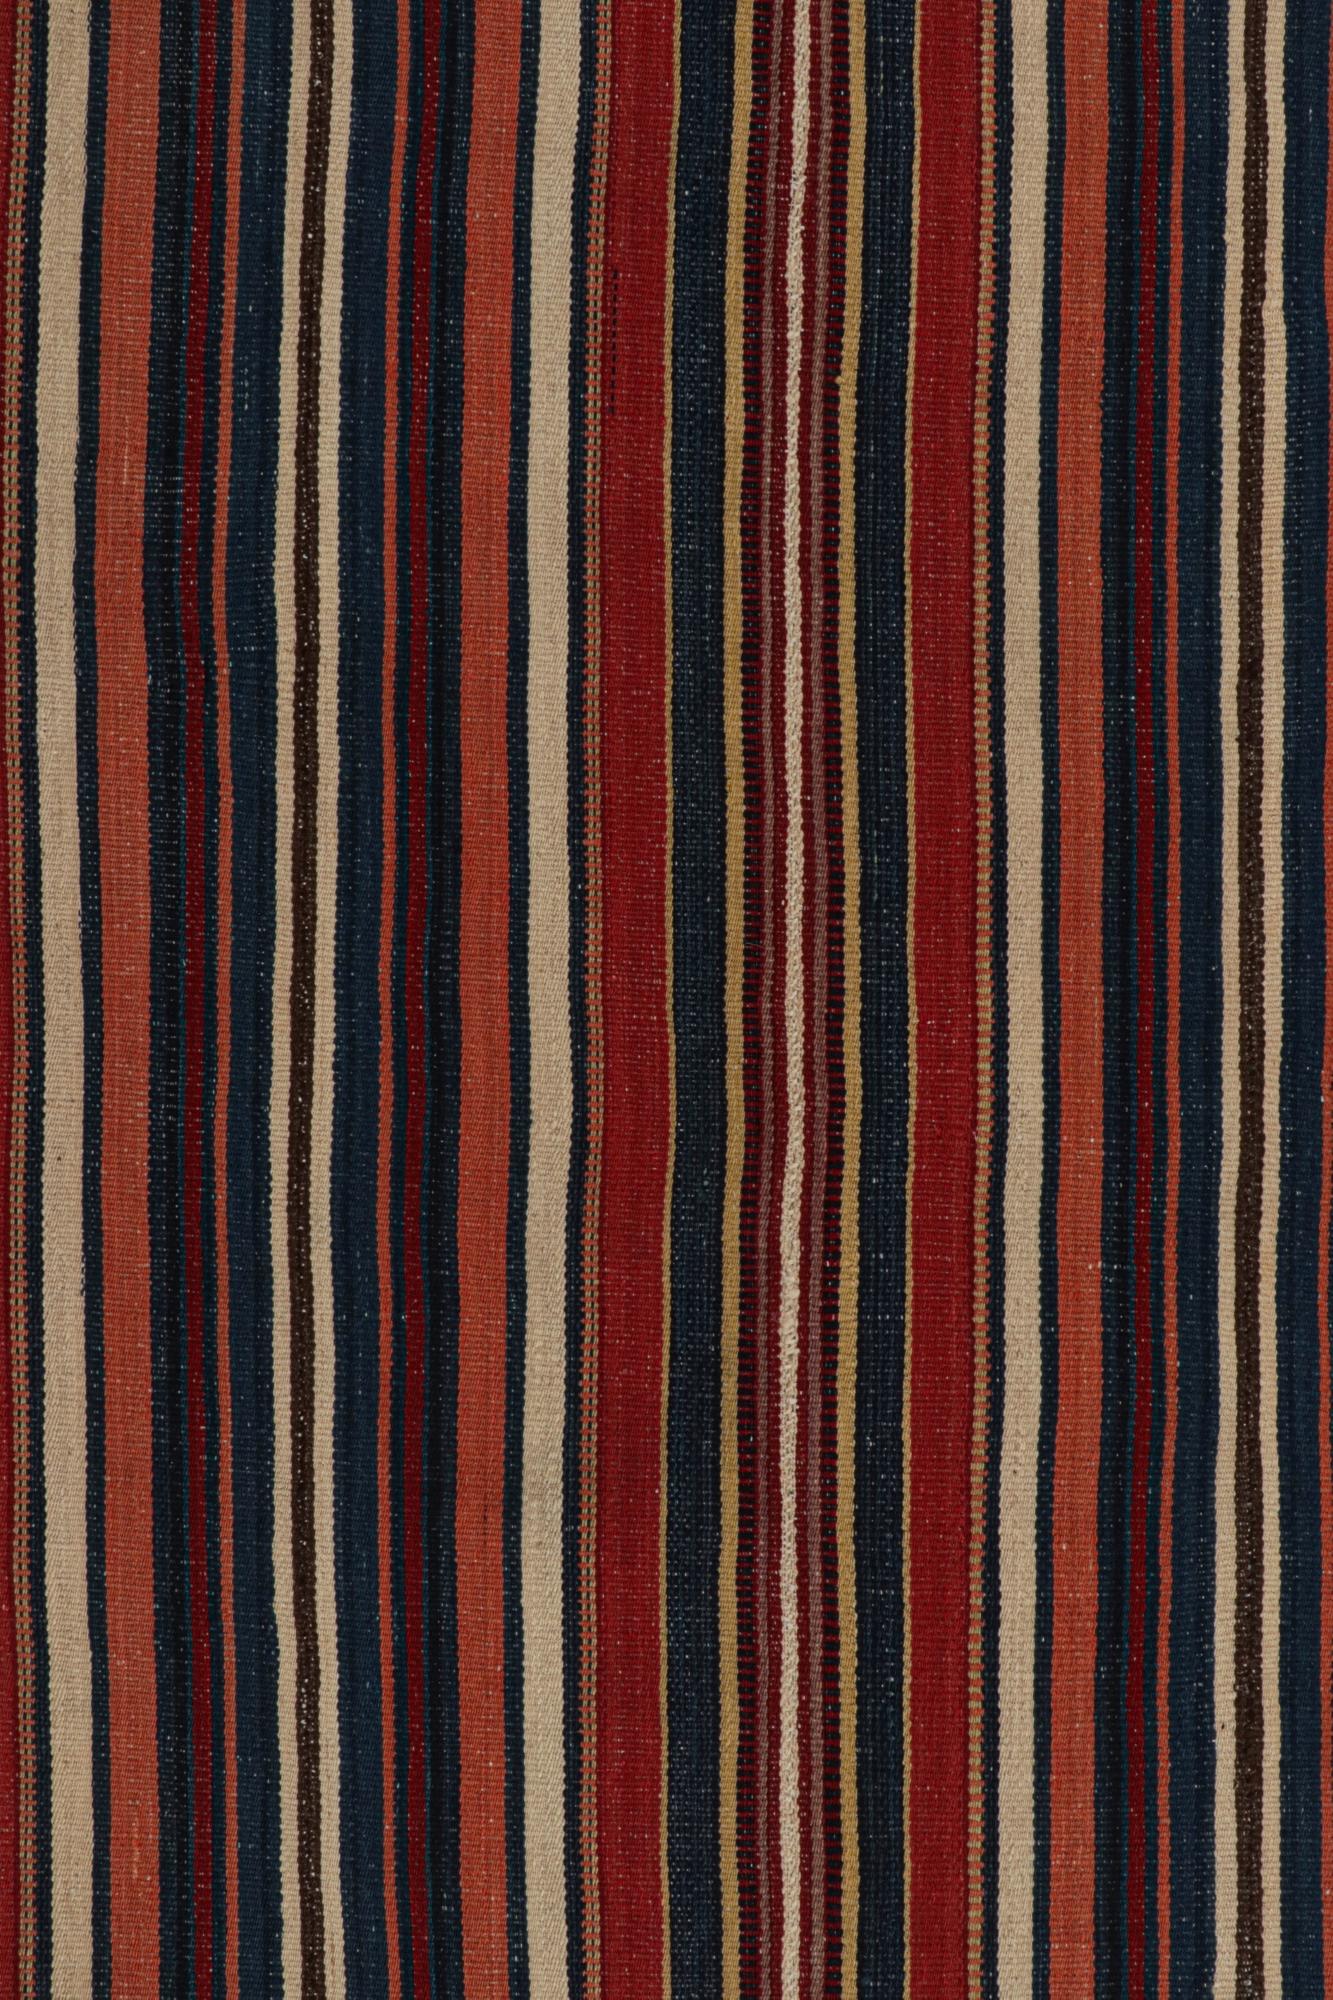 Mid-20th Century Vintage Persian Square Kilim in Red and Beige-Brown Stripes by Rug & Kilim For Sale